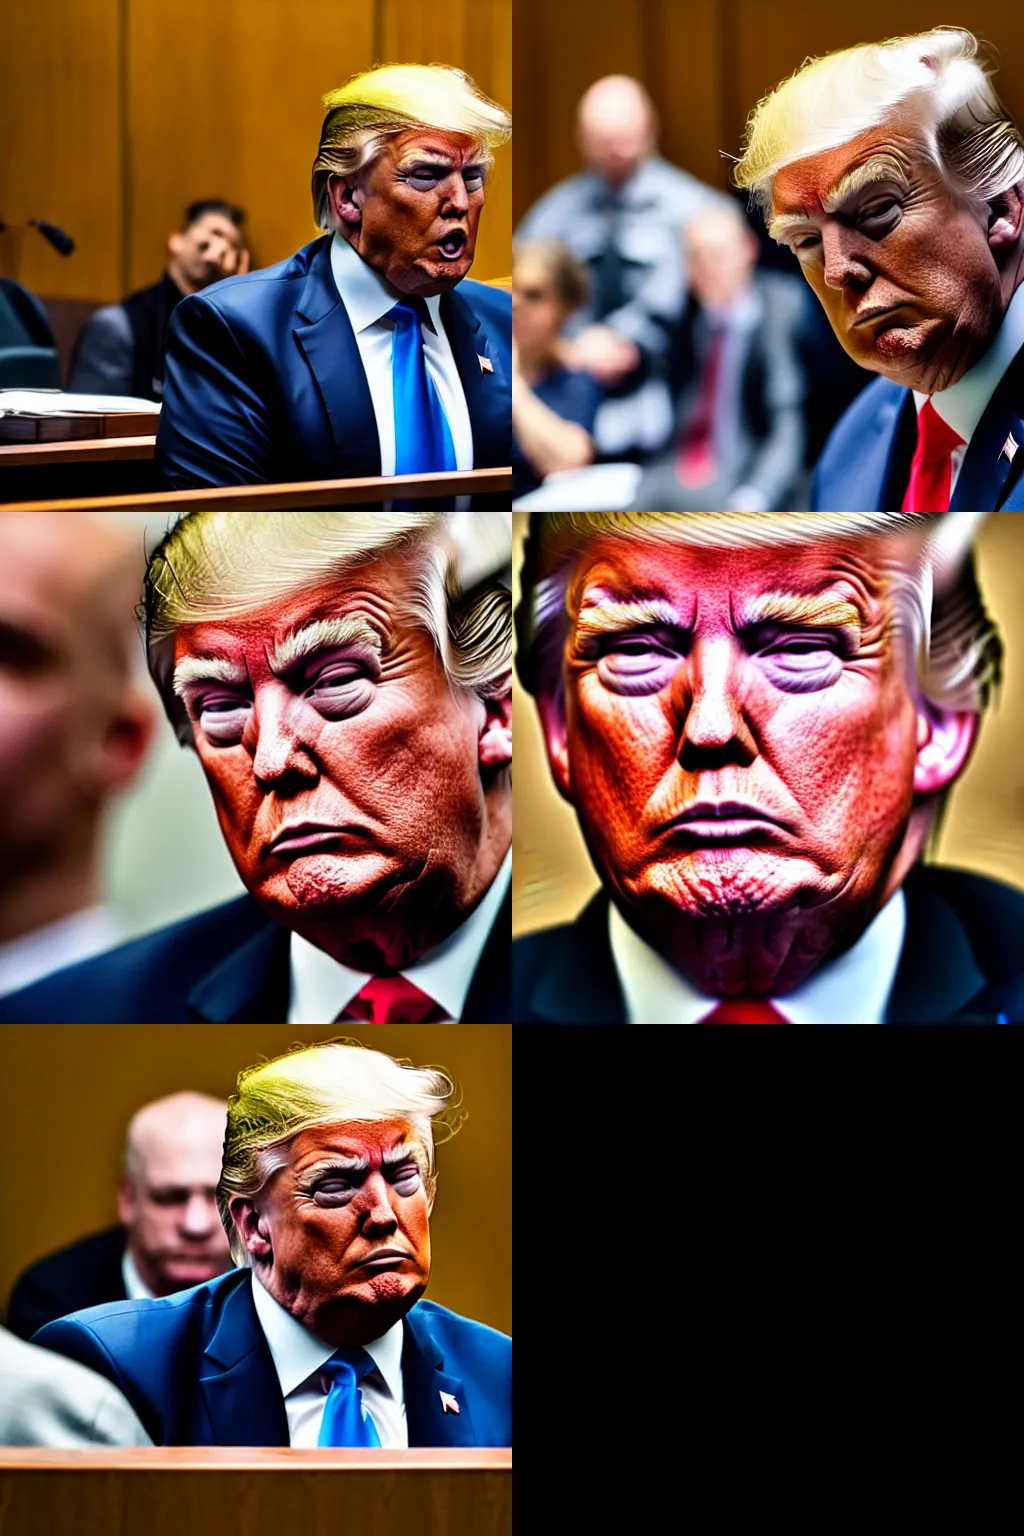 Prompt: Donald Trump crying in a courtroom, XF IQ4, f/1.4, ISO 200, 1/160s, 8K, RAW, unedited, symmetrical balance, in-frame